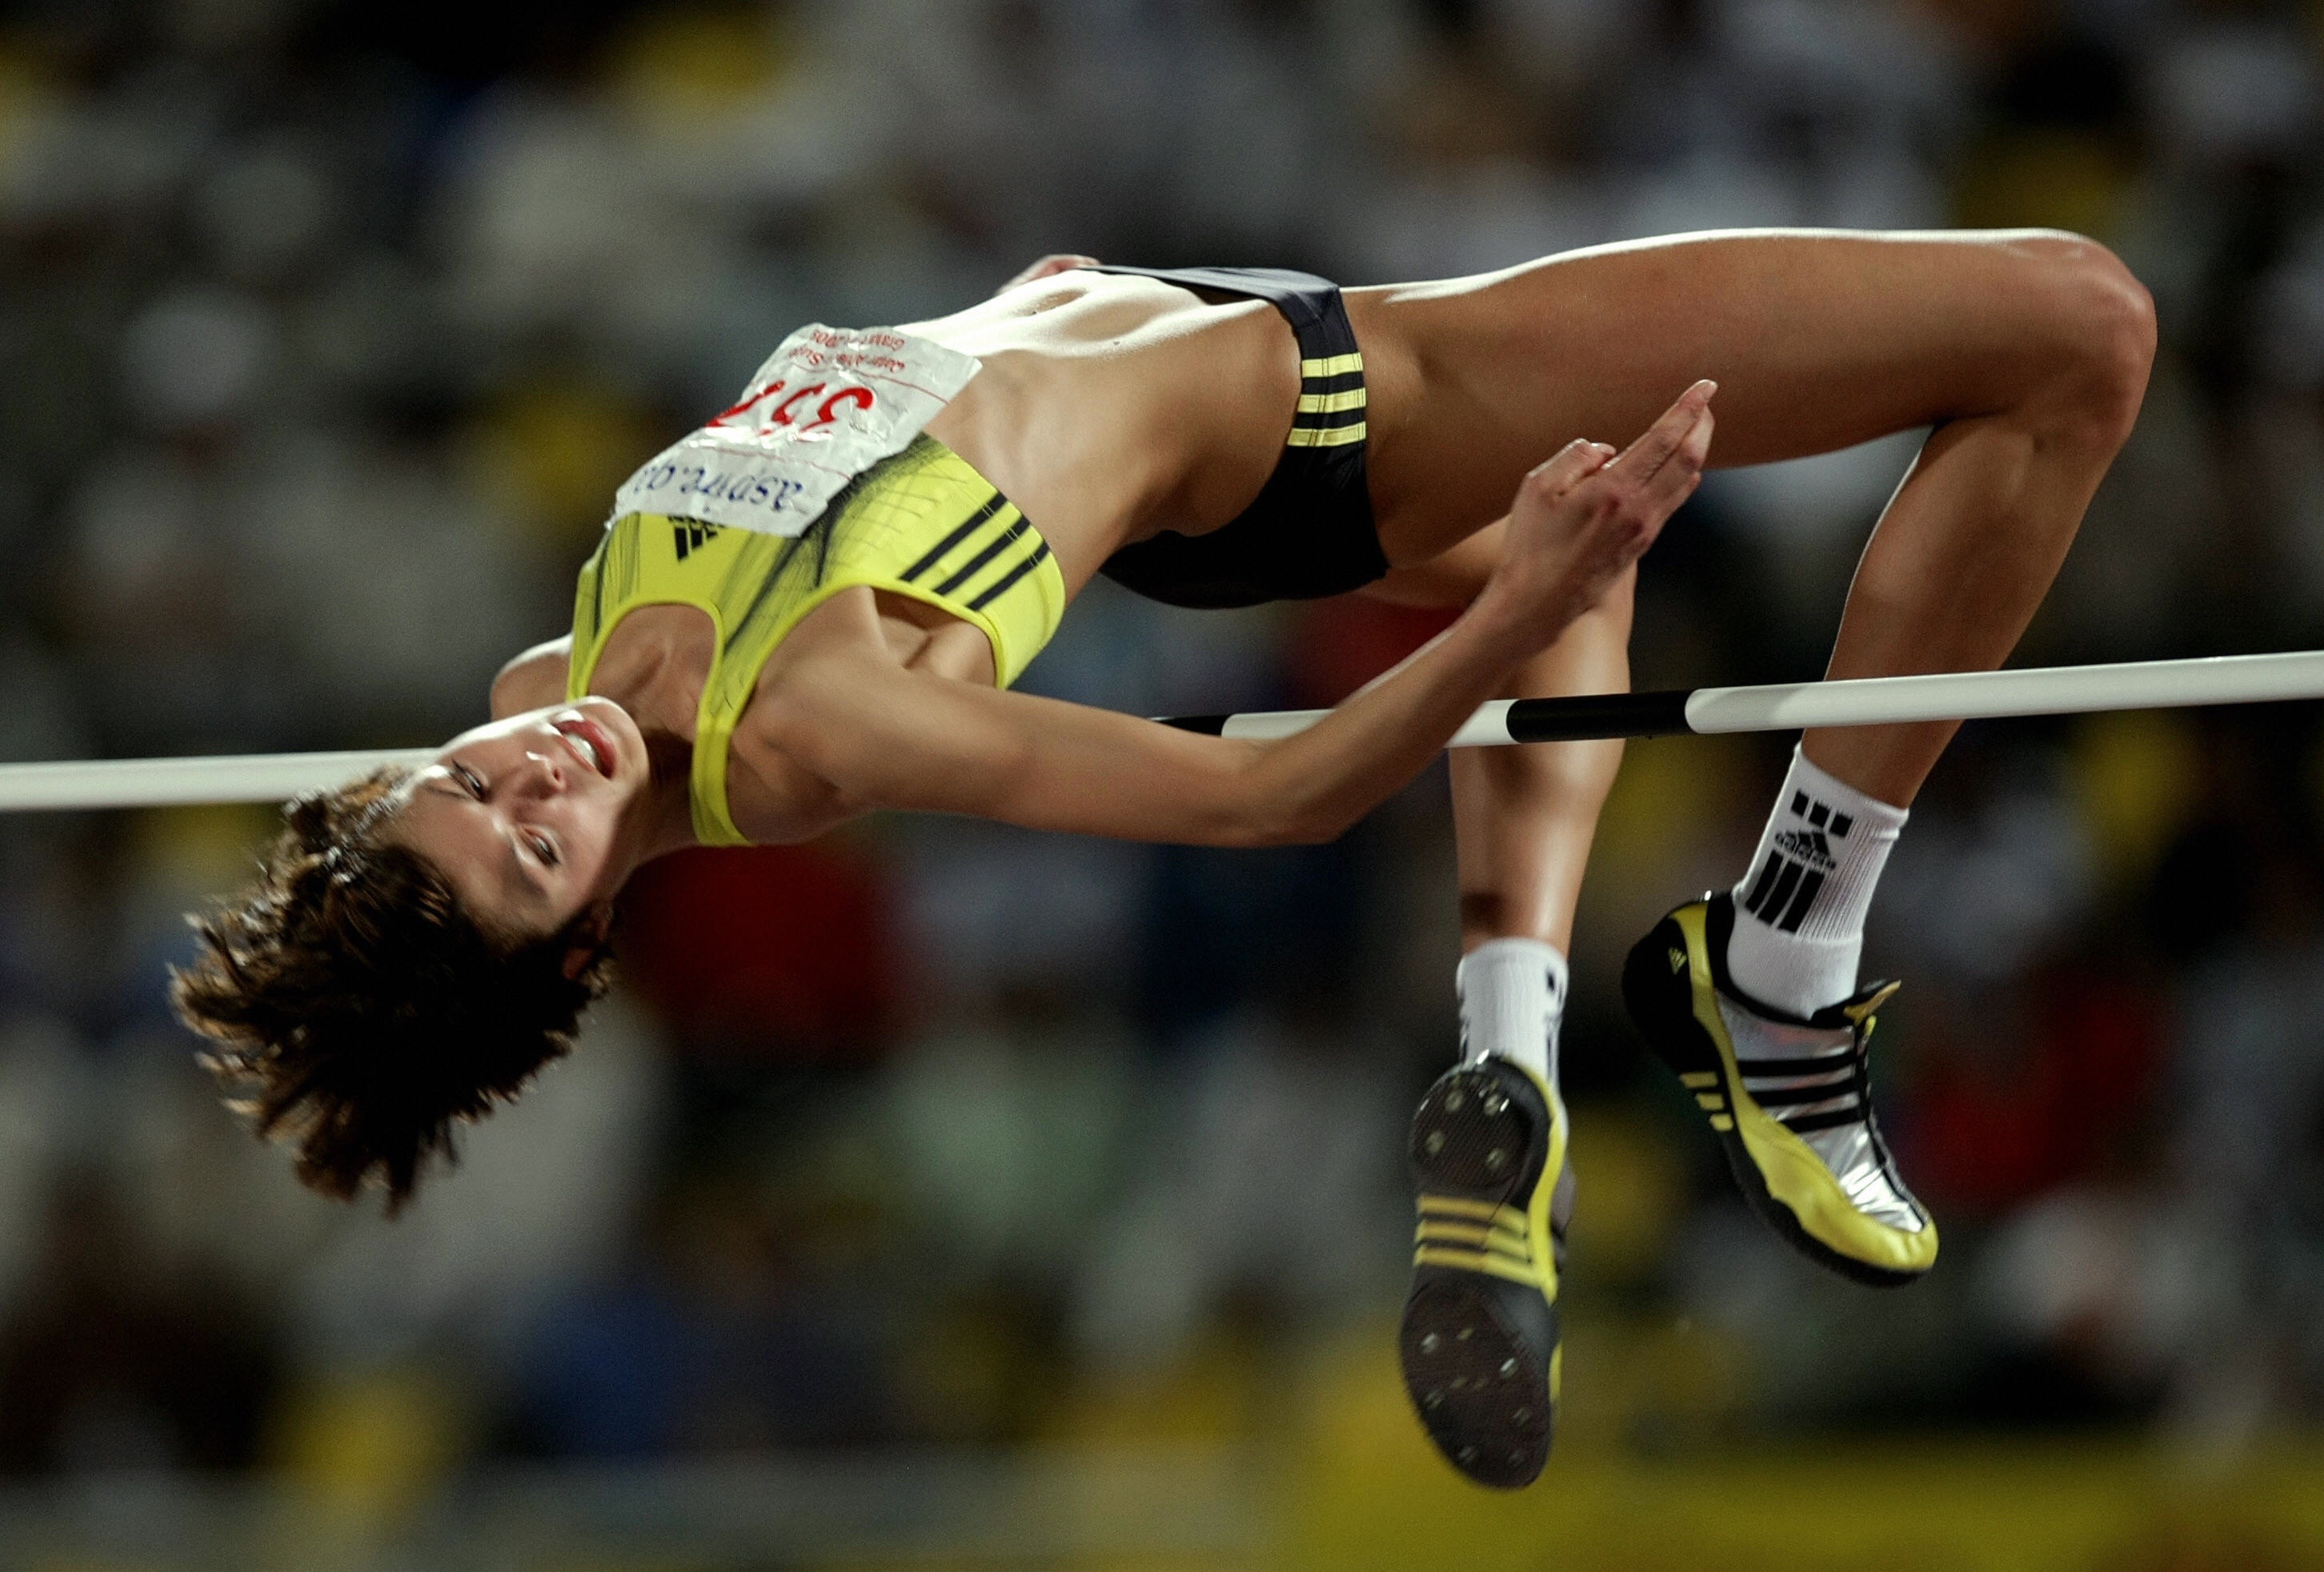 MARWAN NAAMANI/AFP/Getty Images. Blanka Vlasic of Croatia clears 2.05m to win the high jump competition at the Qatar Super Grand Prix in Doha on May 08,2009. Vlasic clinched a new tournament record but she failed to break her own personal best of 2.07m or set a new world record of 2.10m.